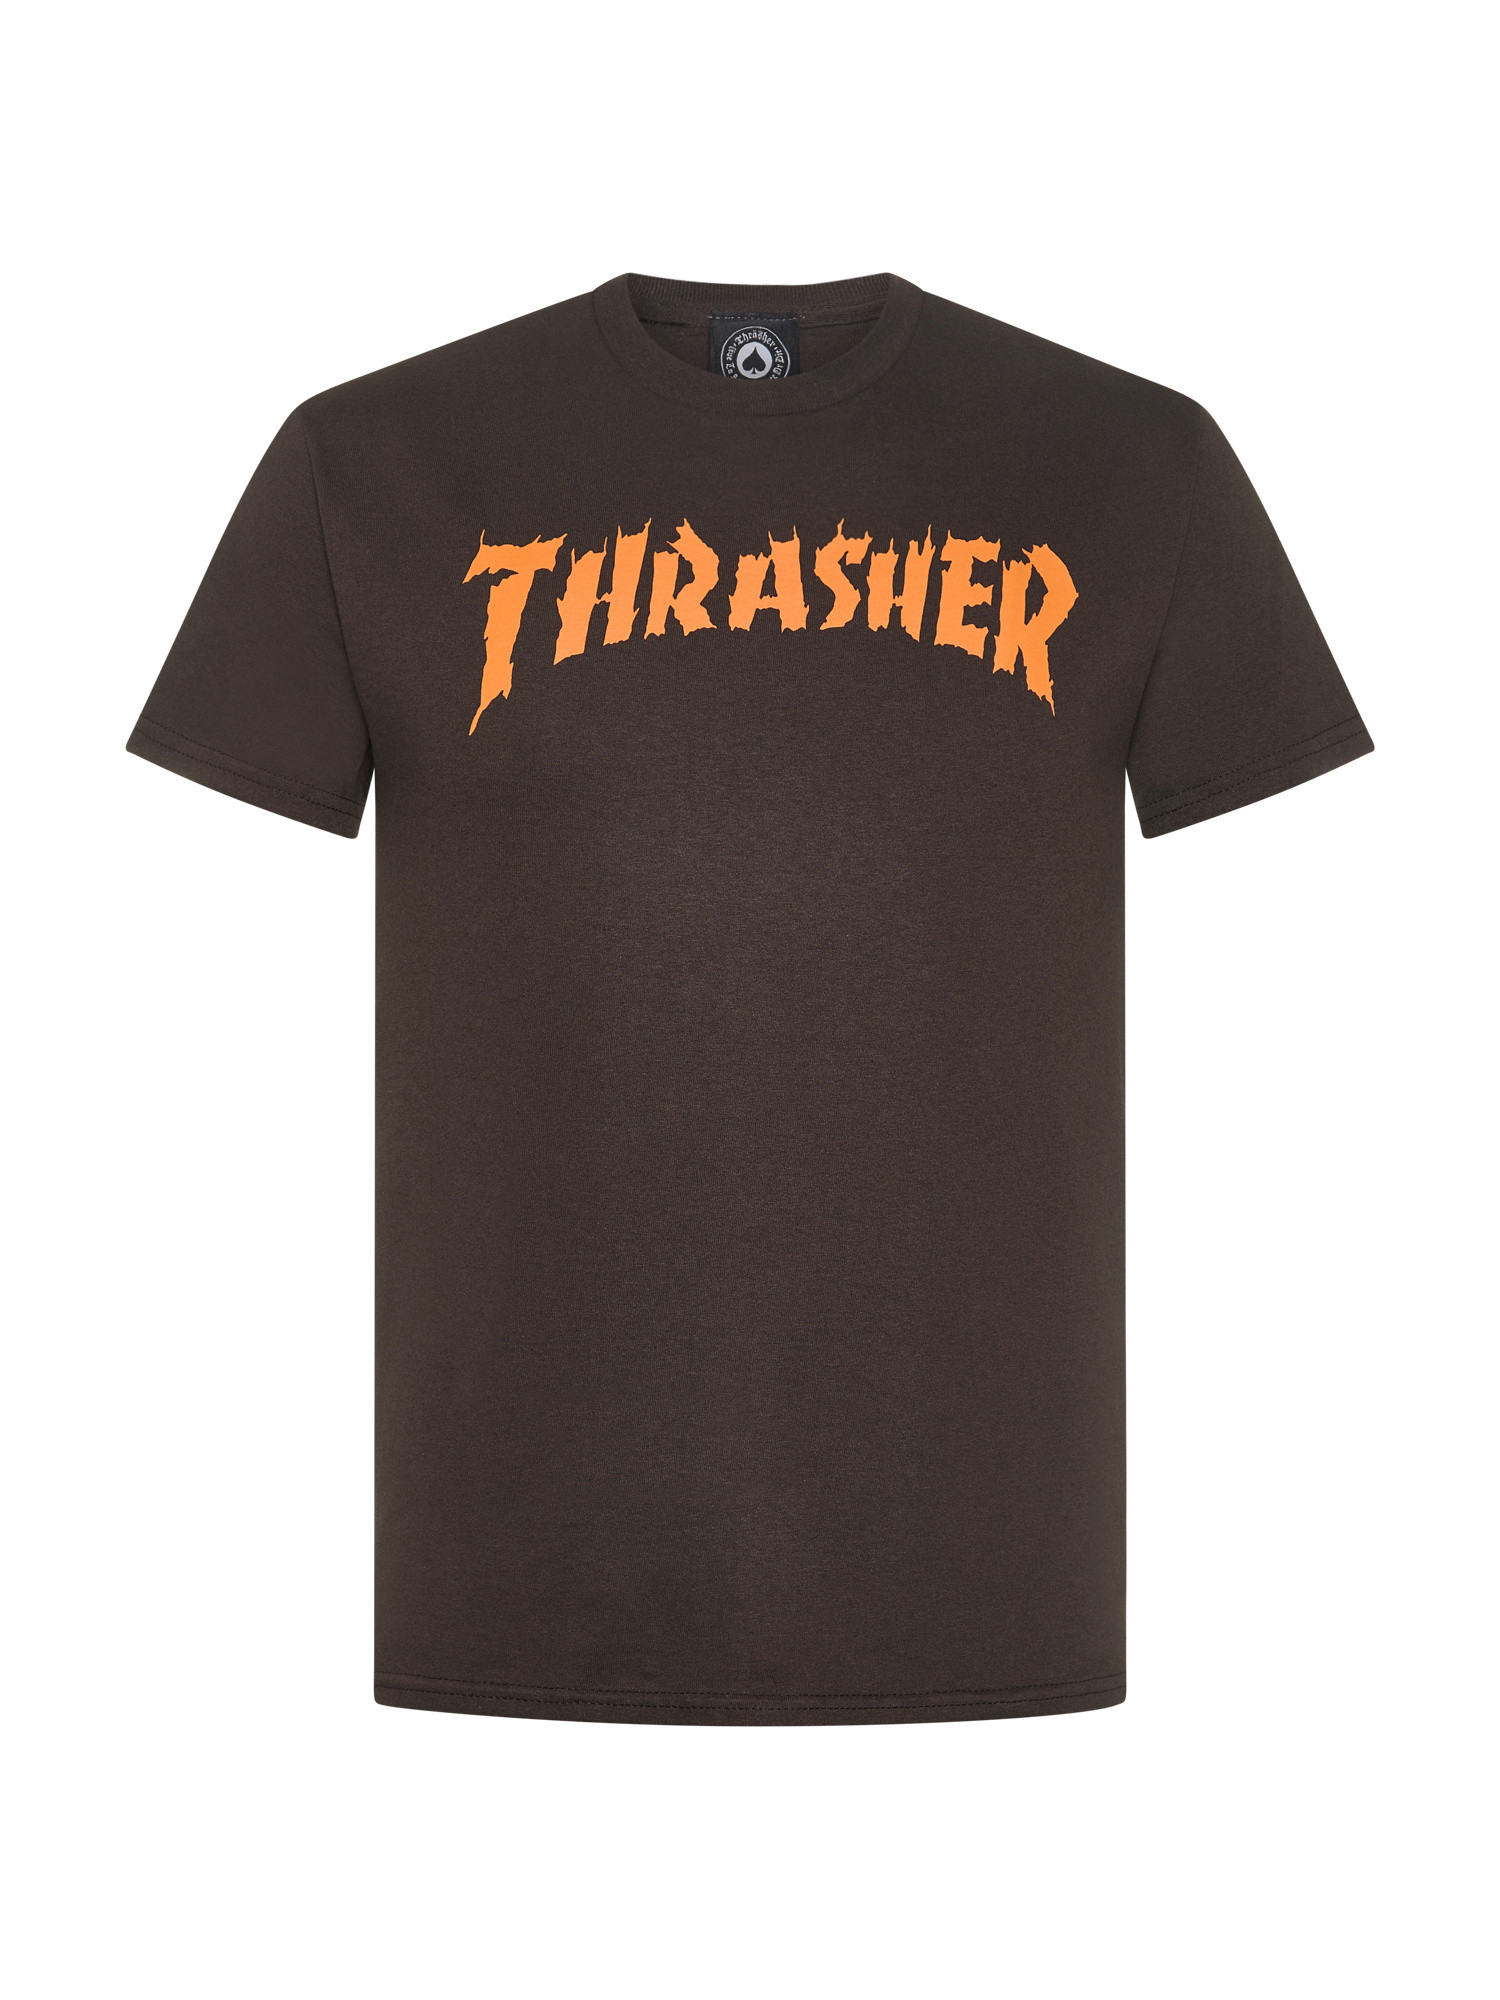 Thrasher - T-Shirt stampa burn it down, Marrone, large image number 0